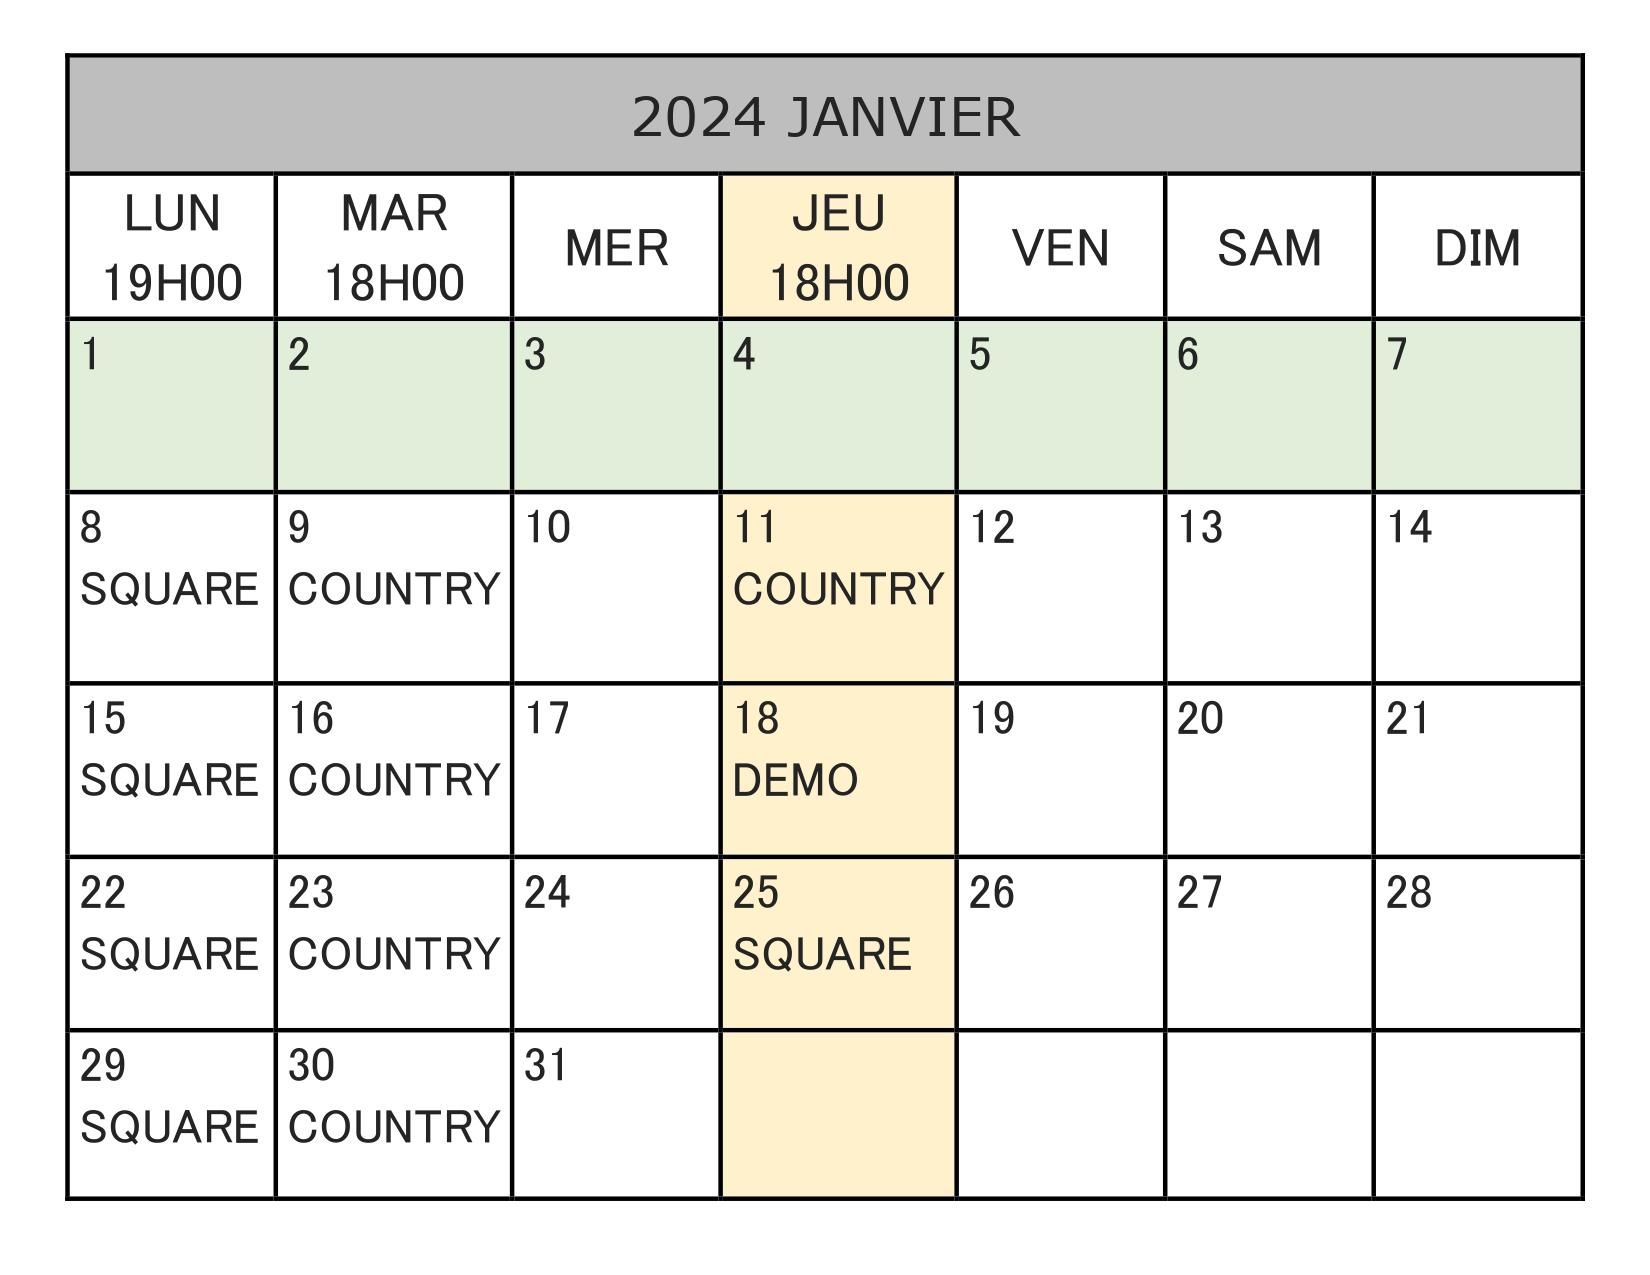 Calendrier a imprimer janvier 2024 pages to jpg 0001